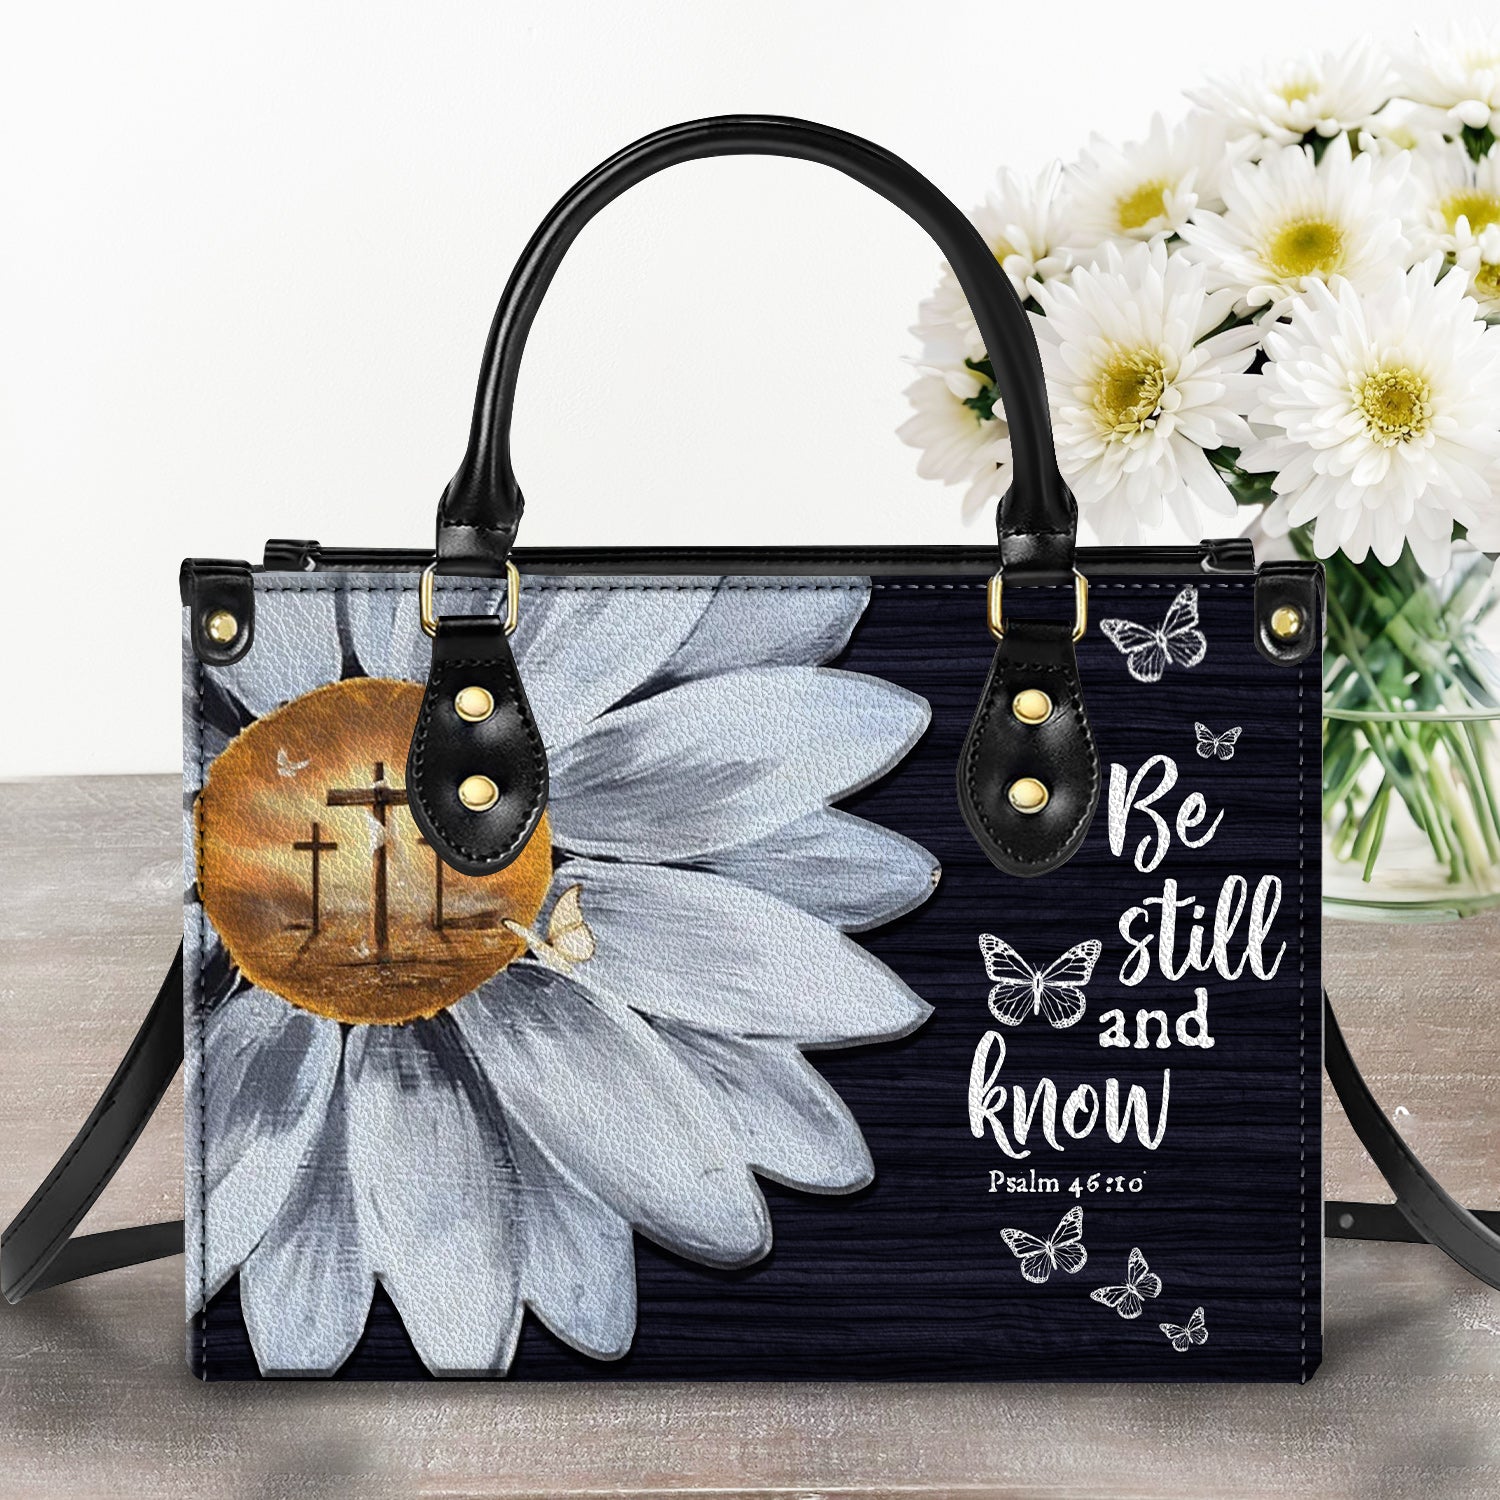 Daisy Flower Be Still and Know Personalized Leather Handbag With Handle Christian Gift Religious Gift For Women